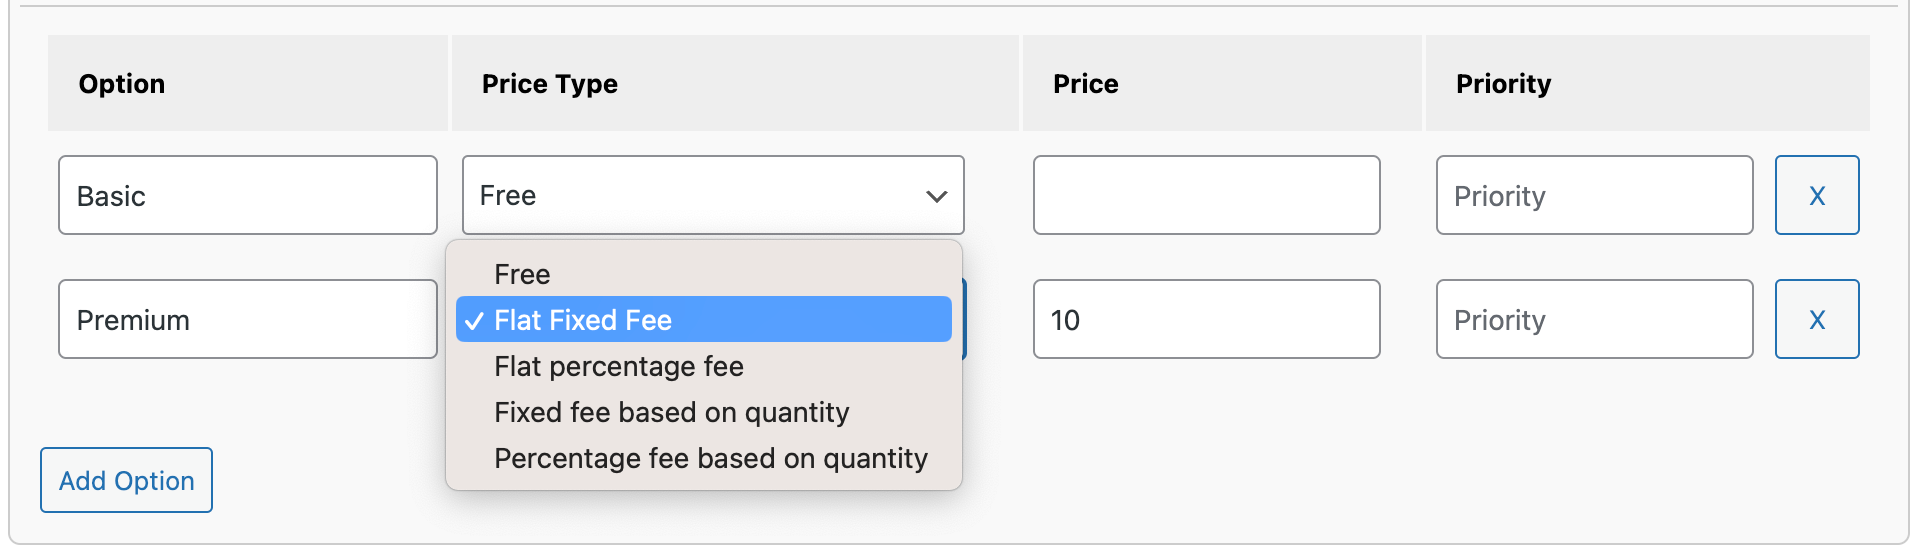 Pricing-models.png